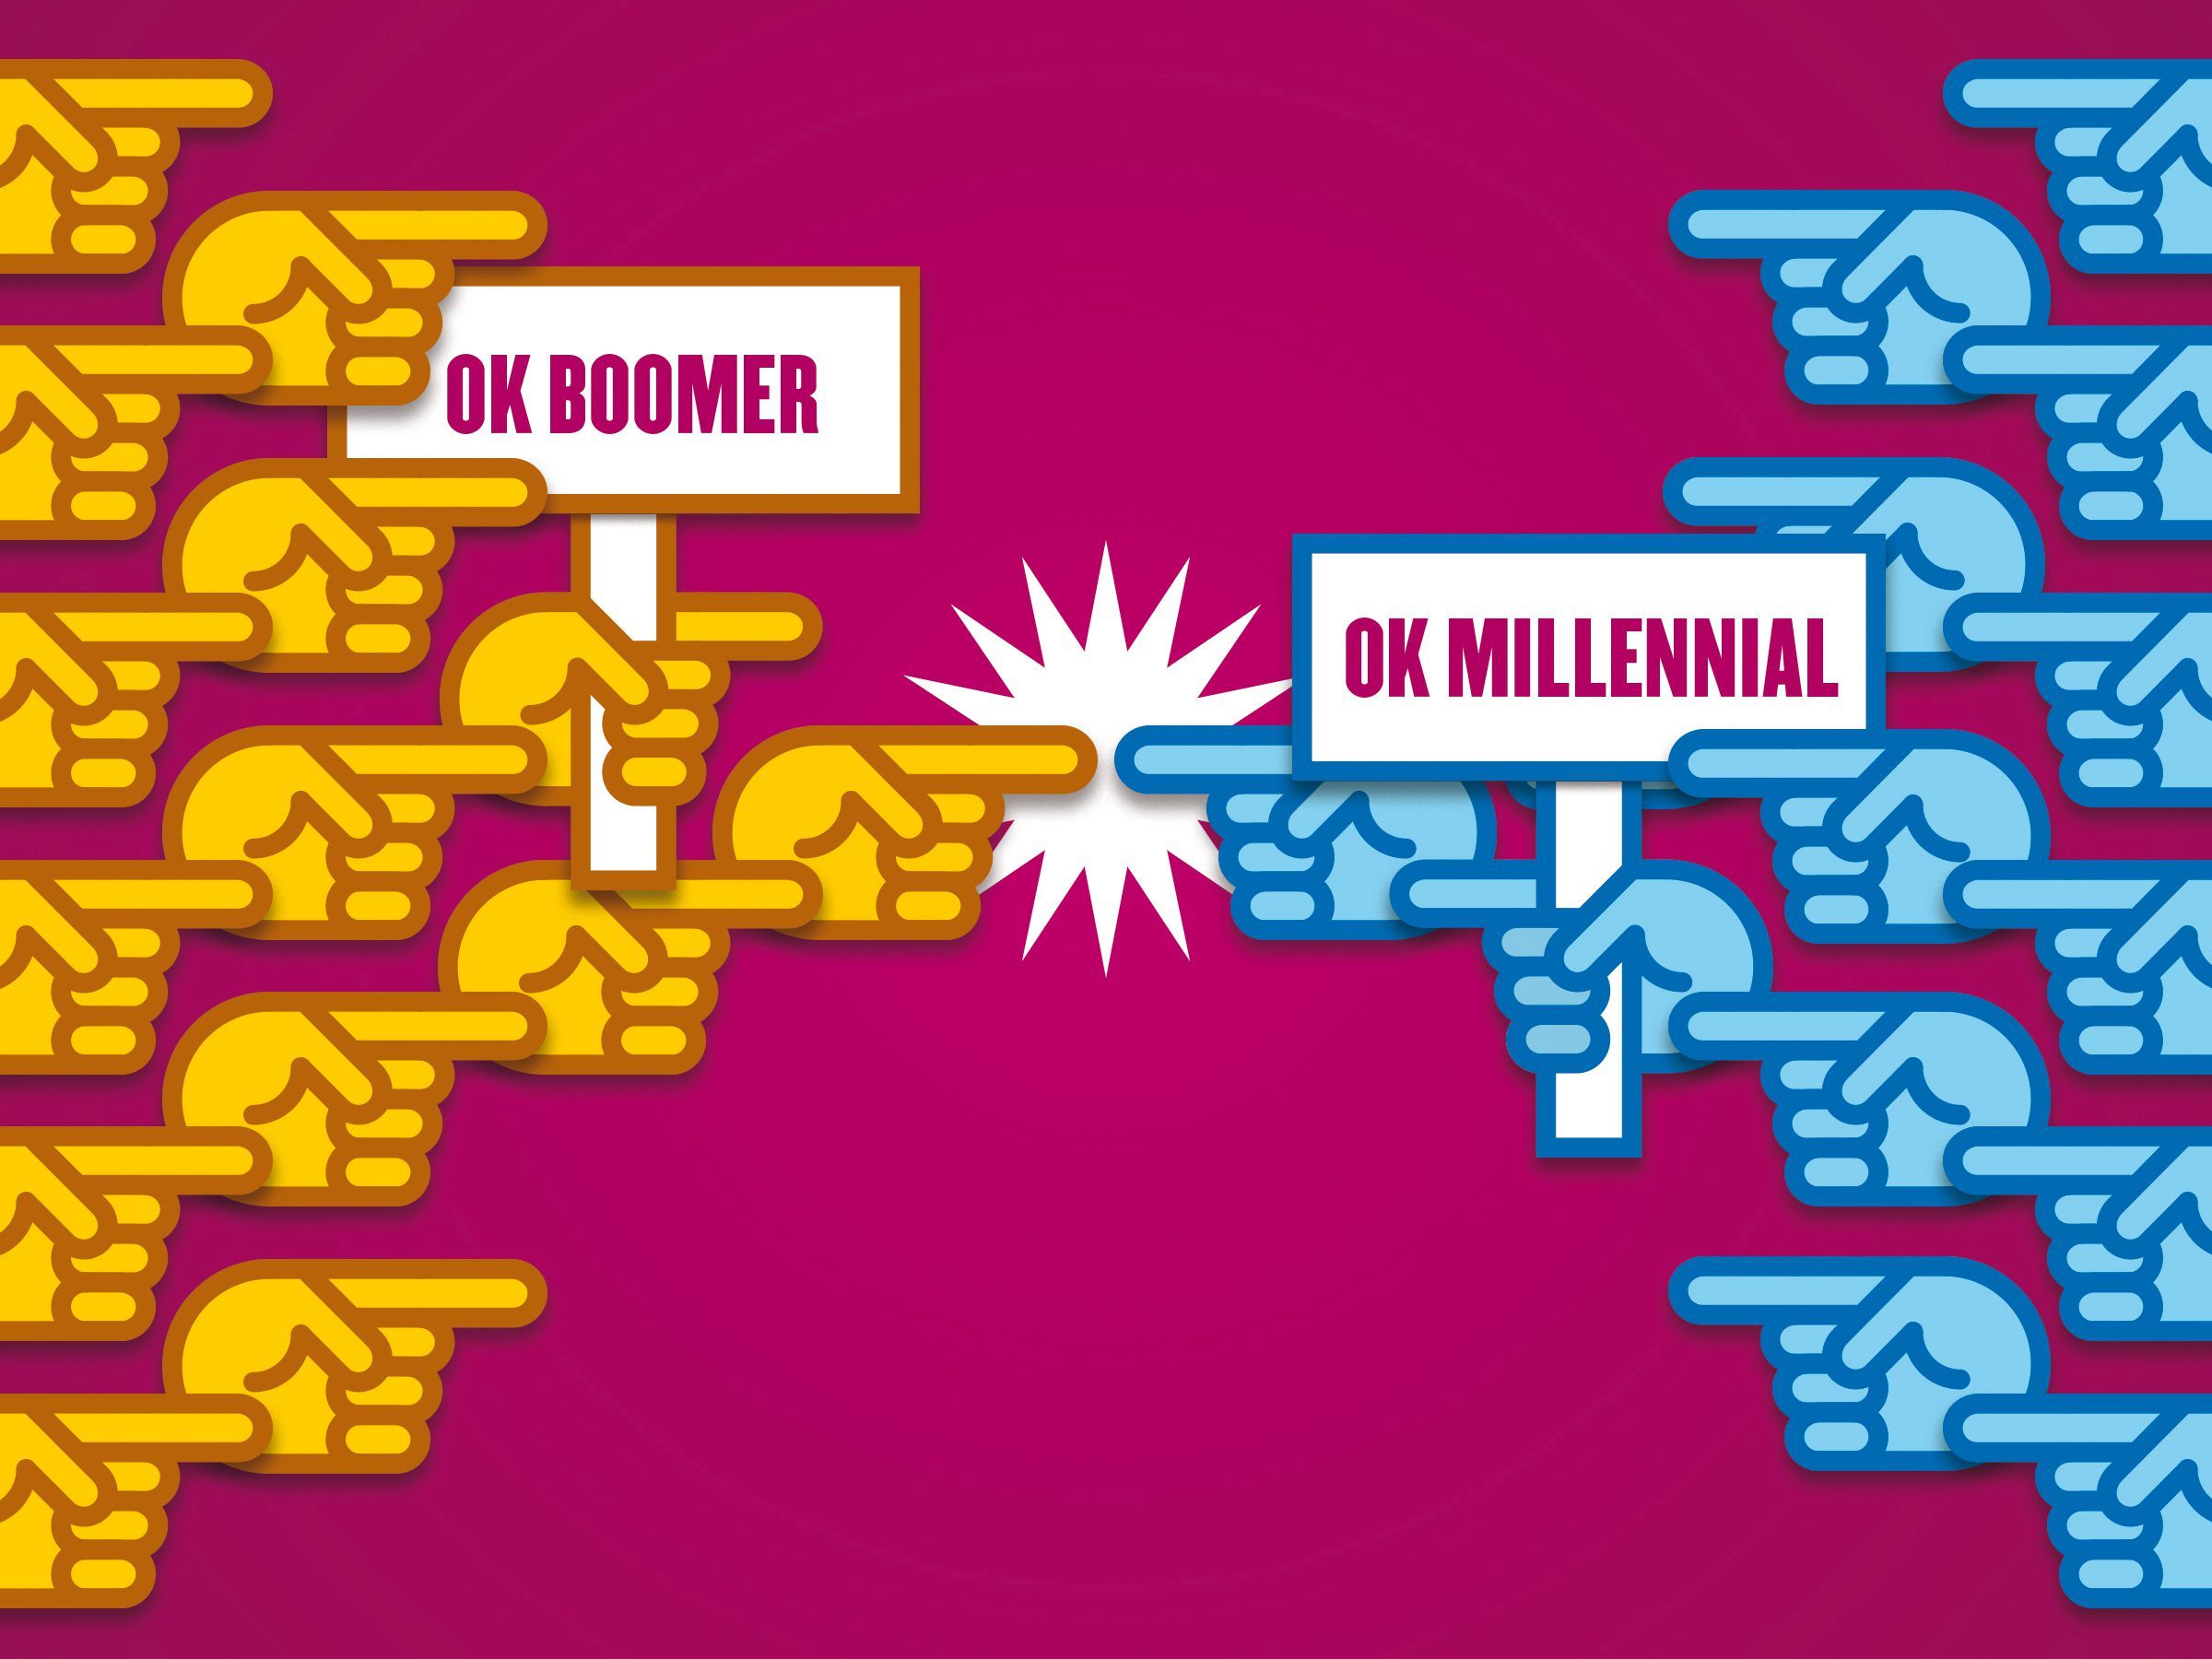 It was the year of 'OK boomer, ' and the generations were at each